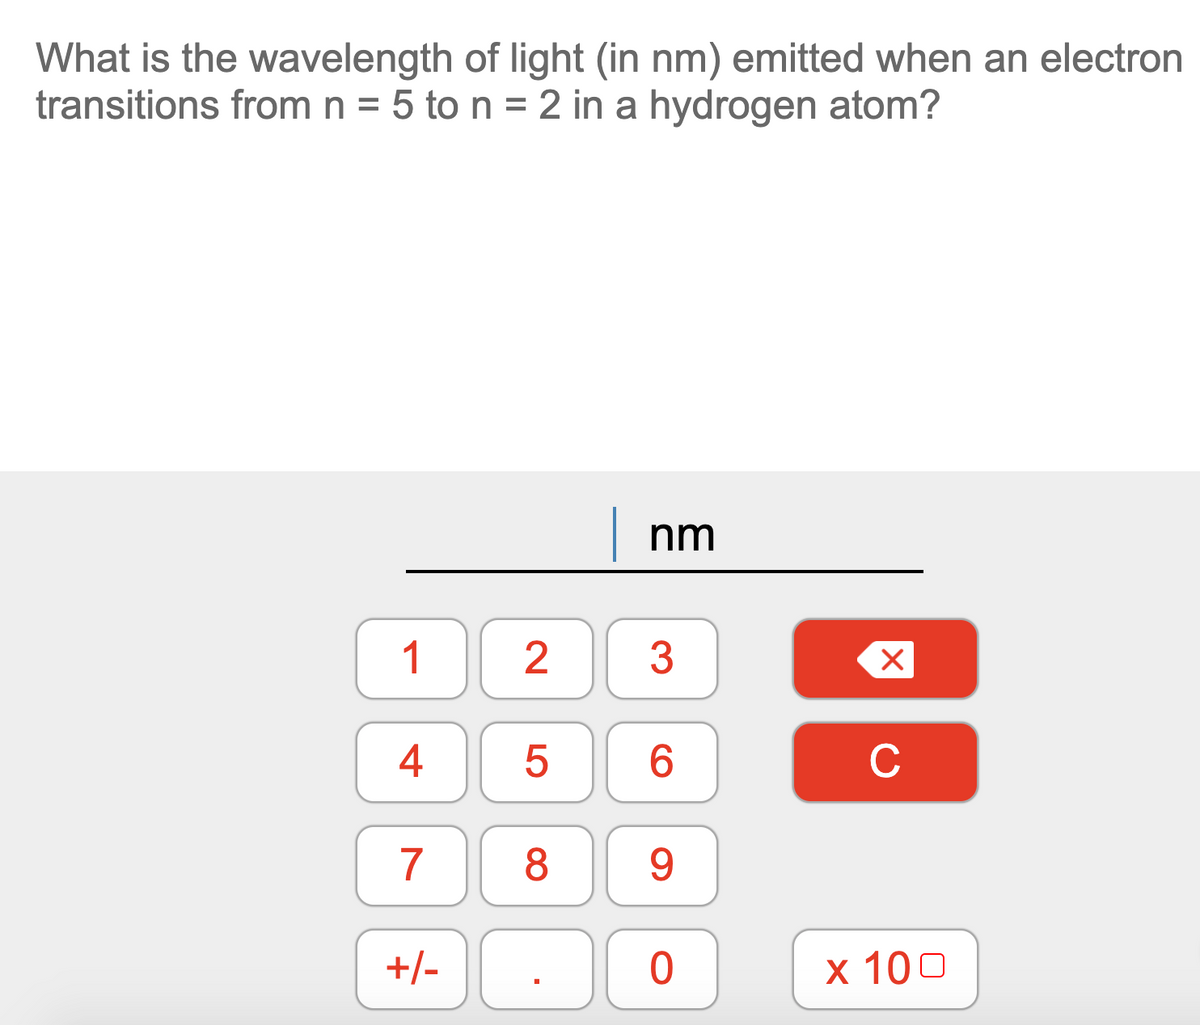 What is the wavelength of light (in nm) emitted when an electron
transitions from n = 5 to n = 2 in a hydrogen atom?
| nm
1
3
4
6.
C
7
8
9
+/-
x 100
2.
LO
